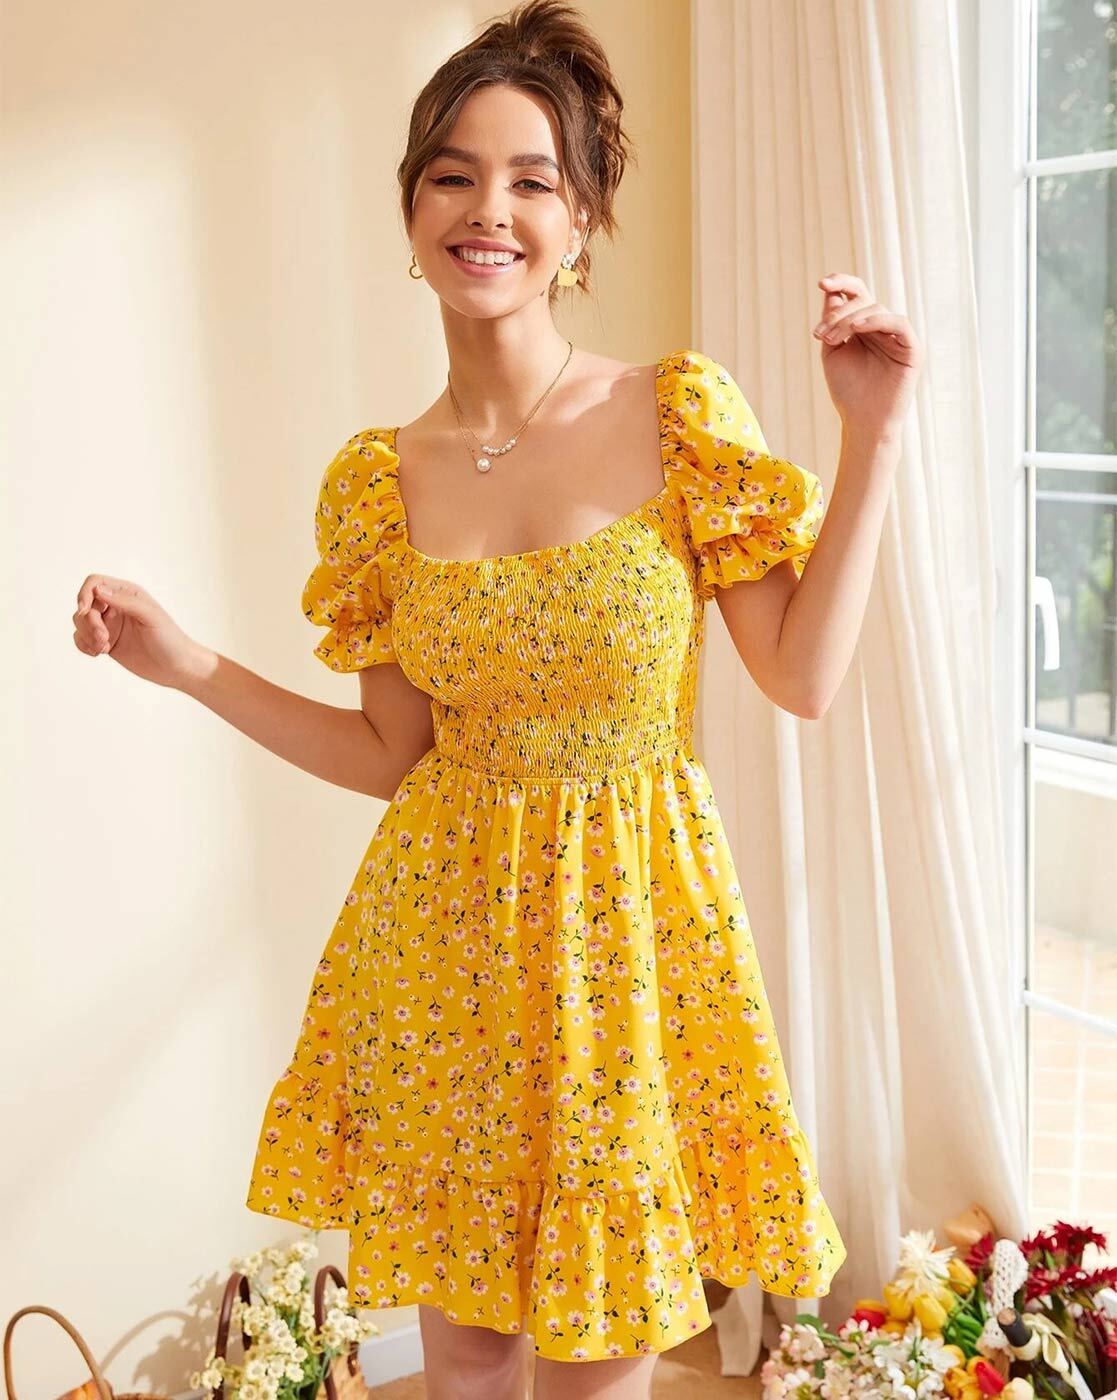 French Elegant Floral Midi Dress With Puff Sleeves Beach Style Floral  Evening Dress For Women, Korean Fashion 2023 Summer Design From Mantle,  $23.81 | DHgate.Com